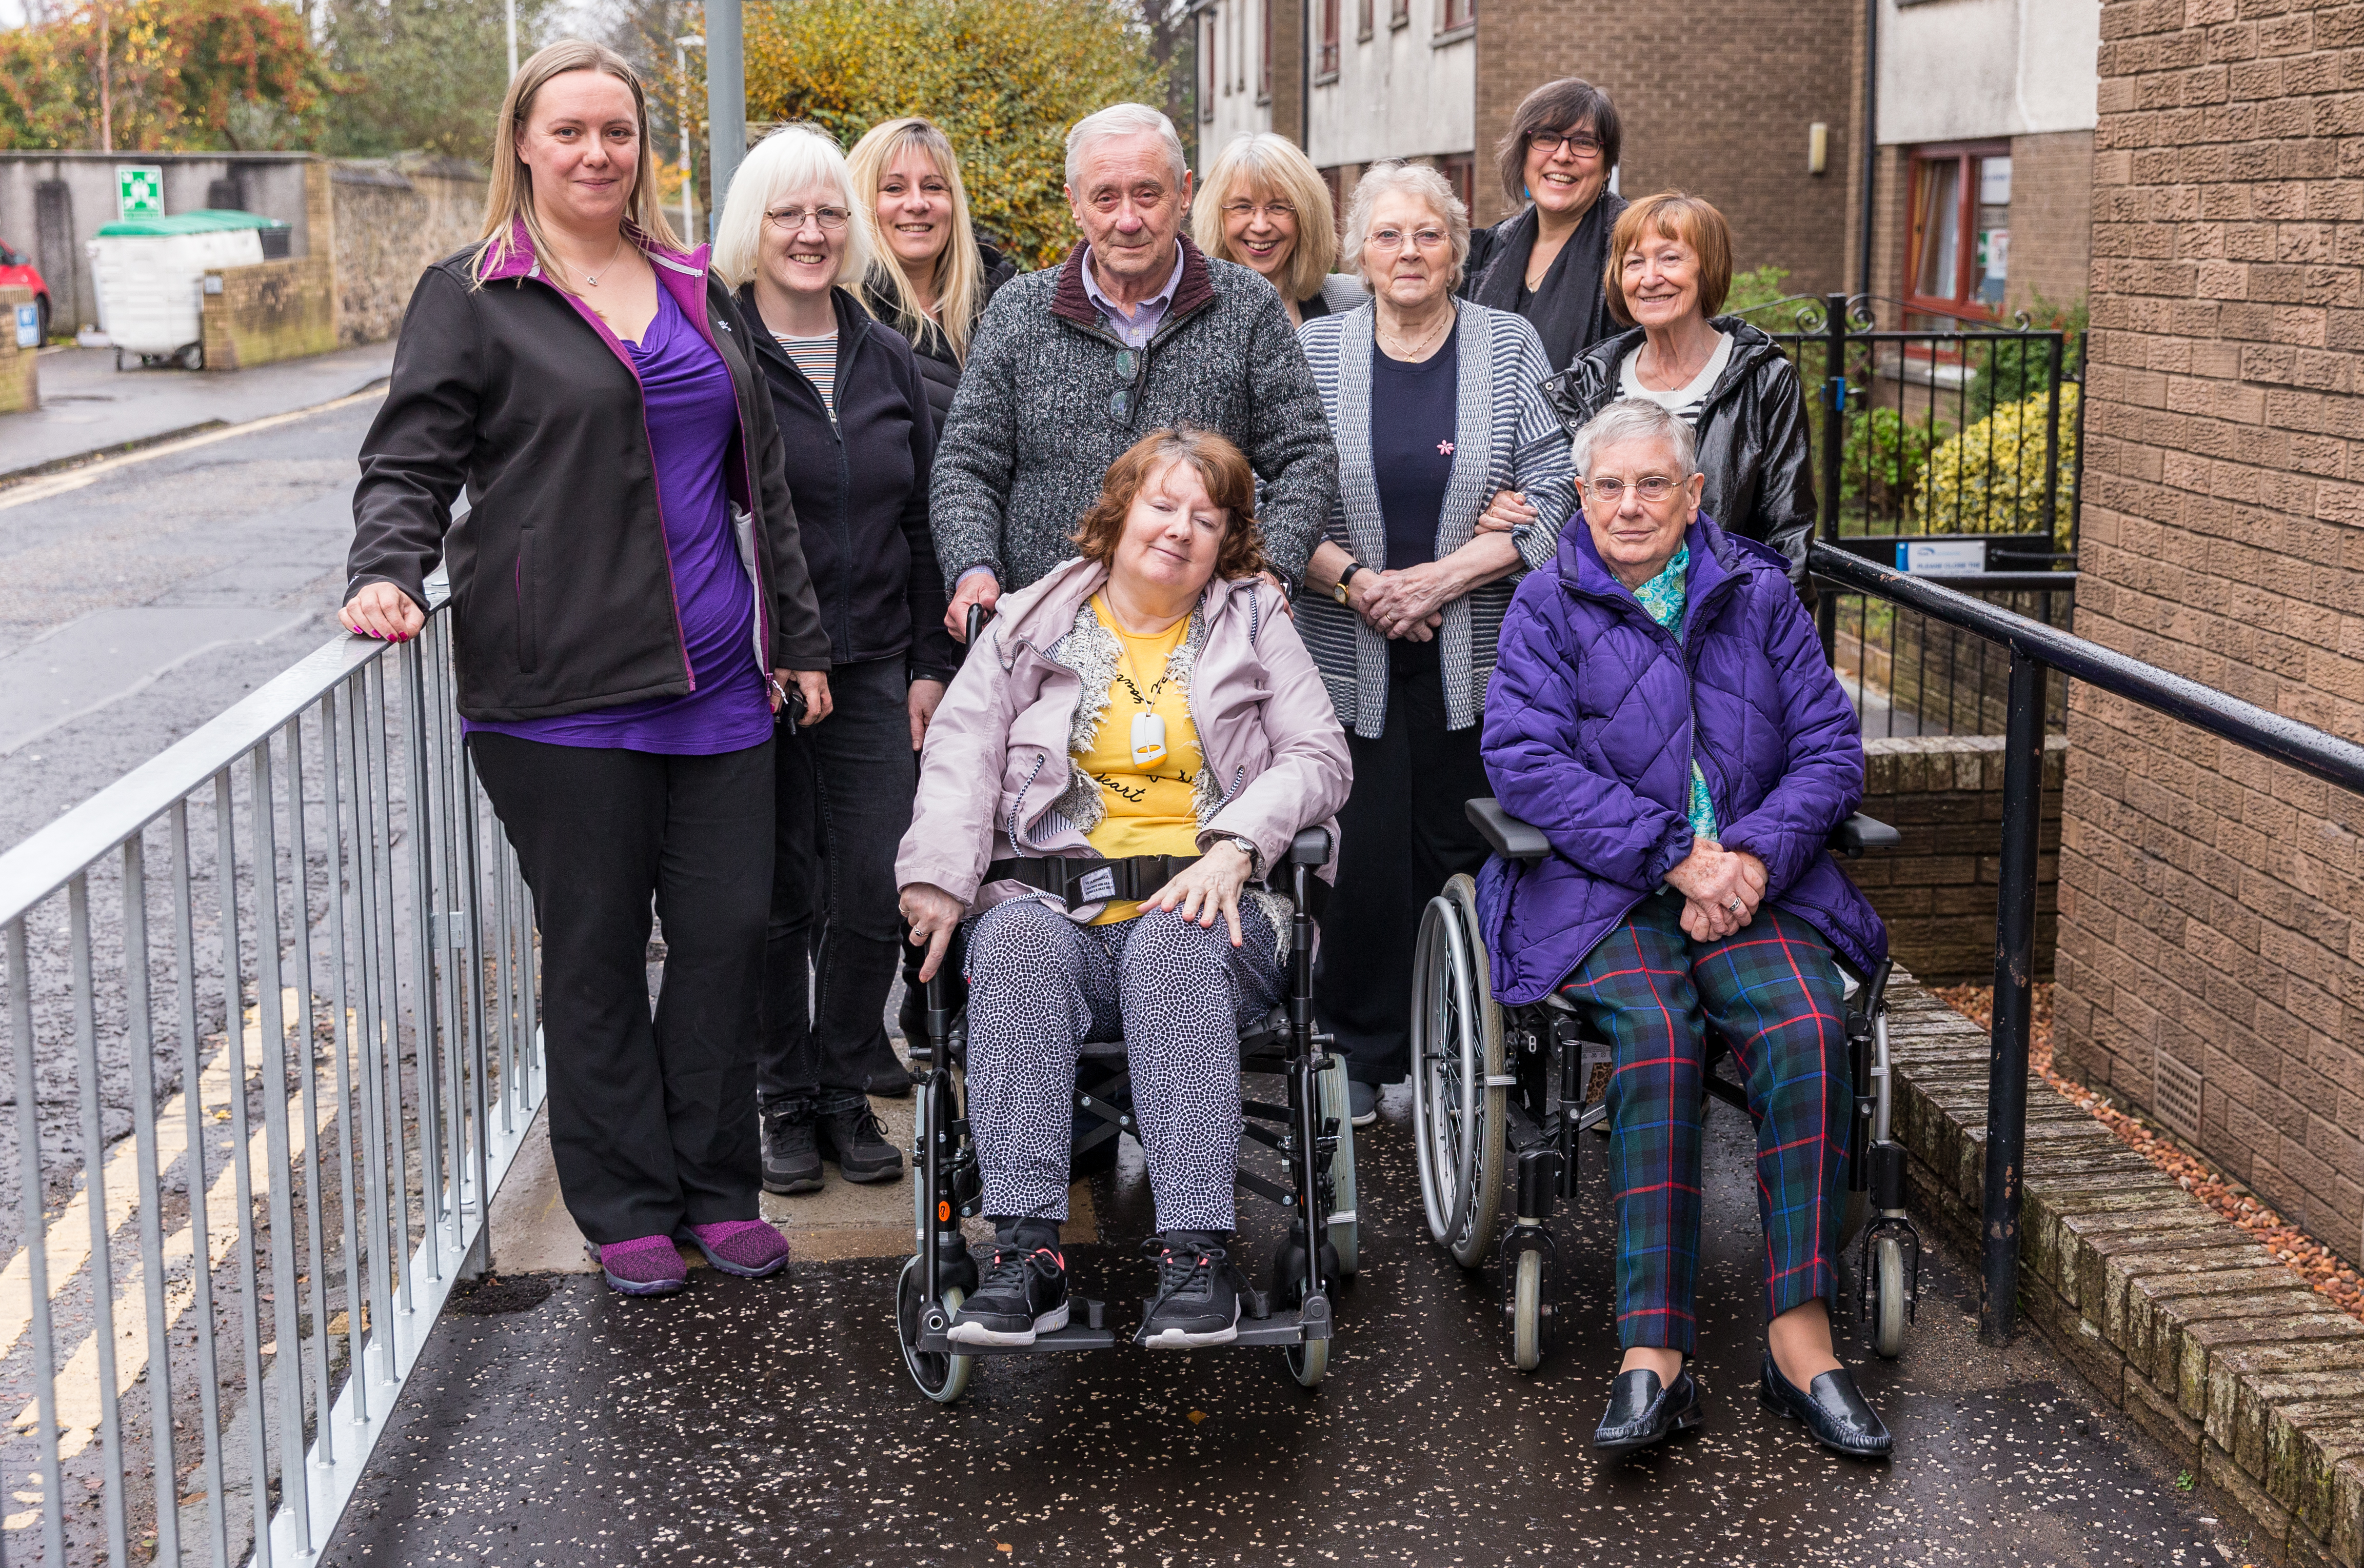 a group of older people including two women in wheelchairs, stand and smile at the camera on the pavement